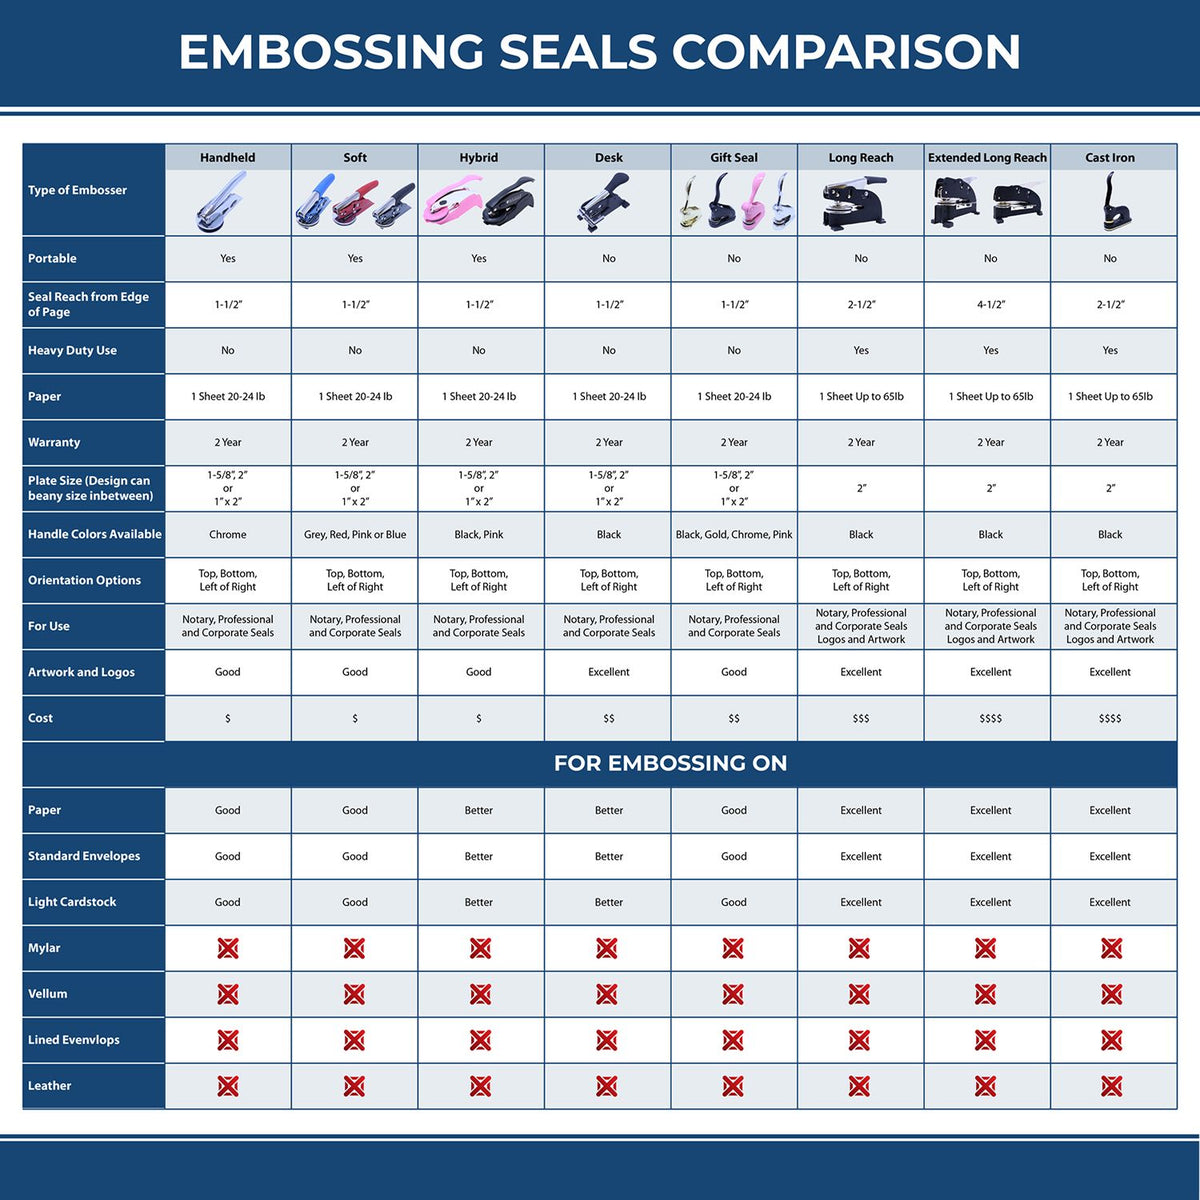 A comparison chart for the different types of mount models available for the Hybrid Colorado Land Surveyor Seal